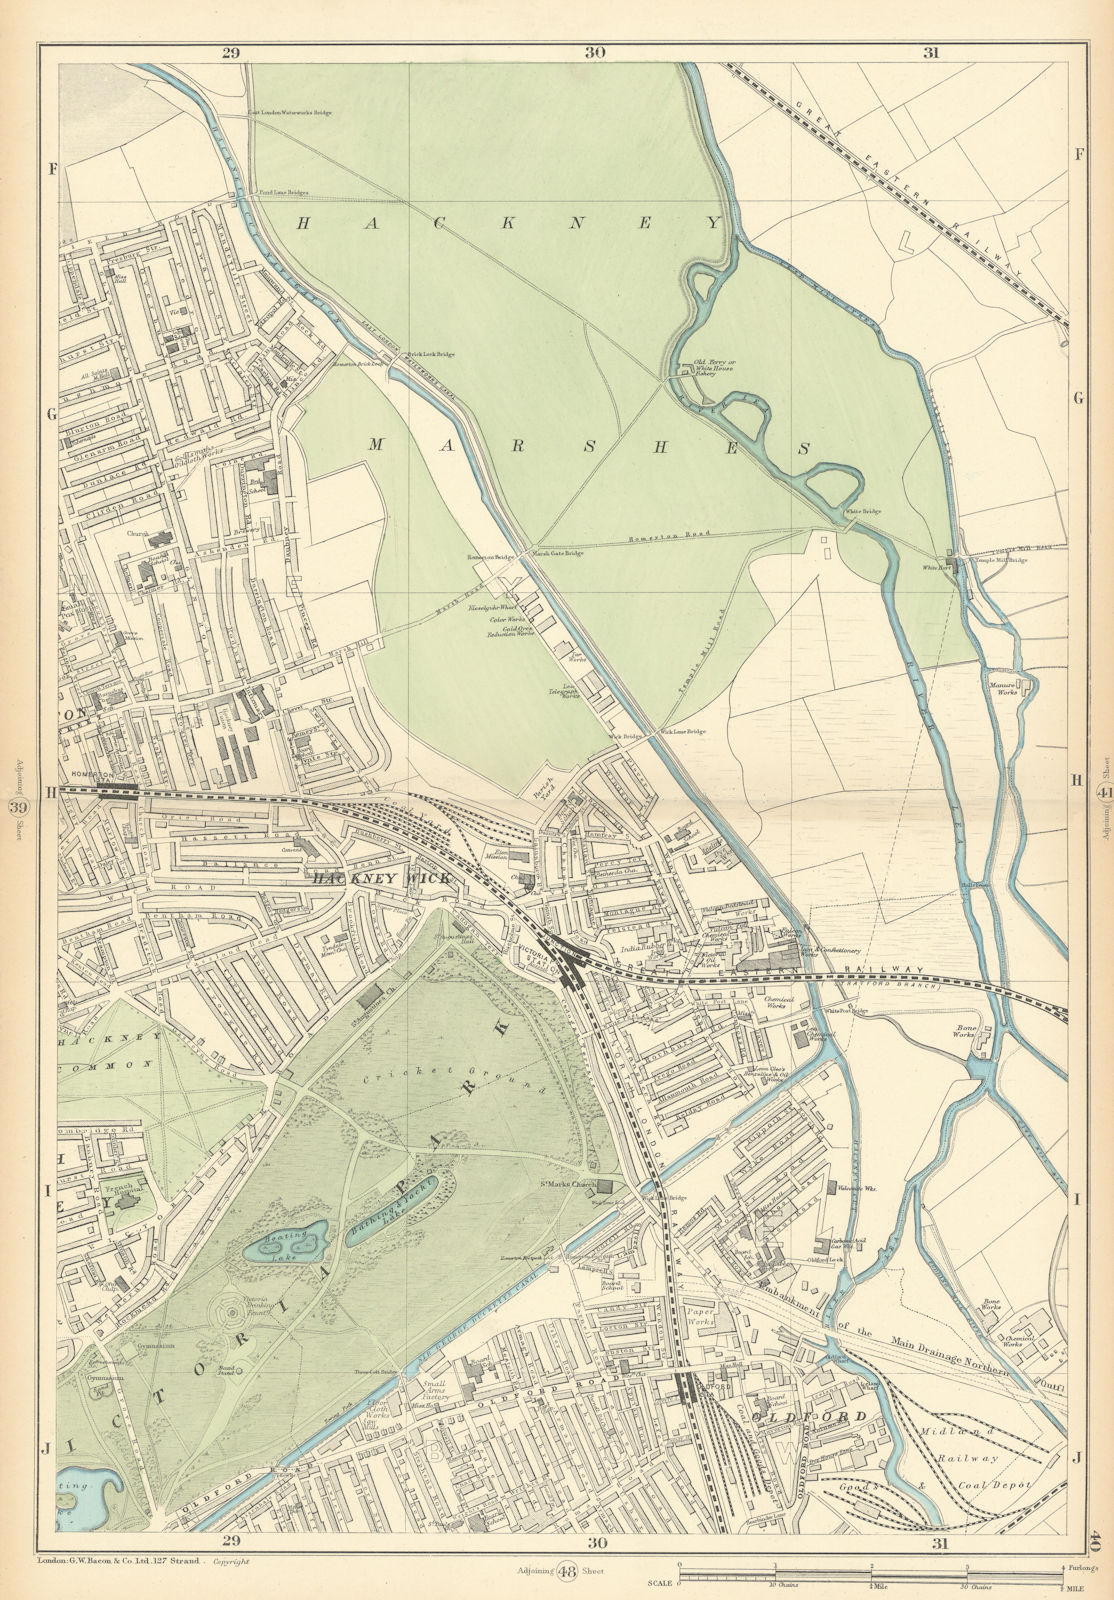 HACKNEY WICK/Marshes Victoria Park Old Ford Homerton Clapton Leyton 1900 map